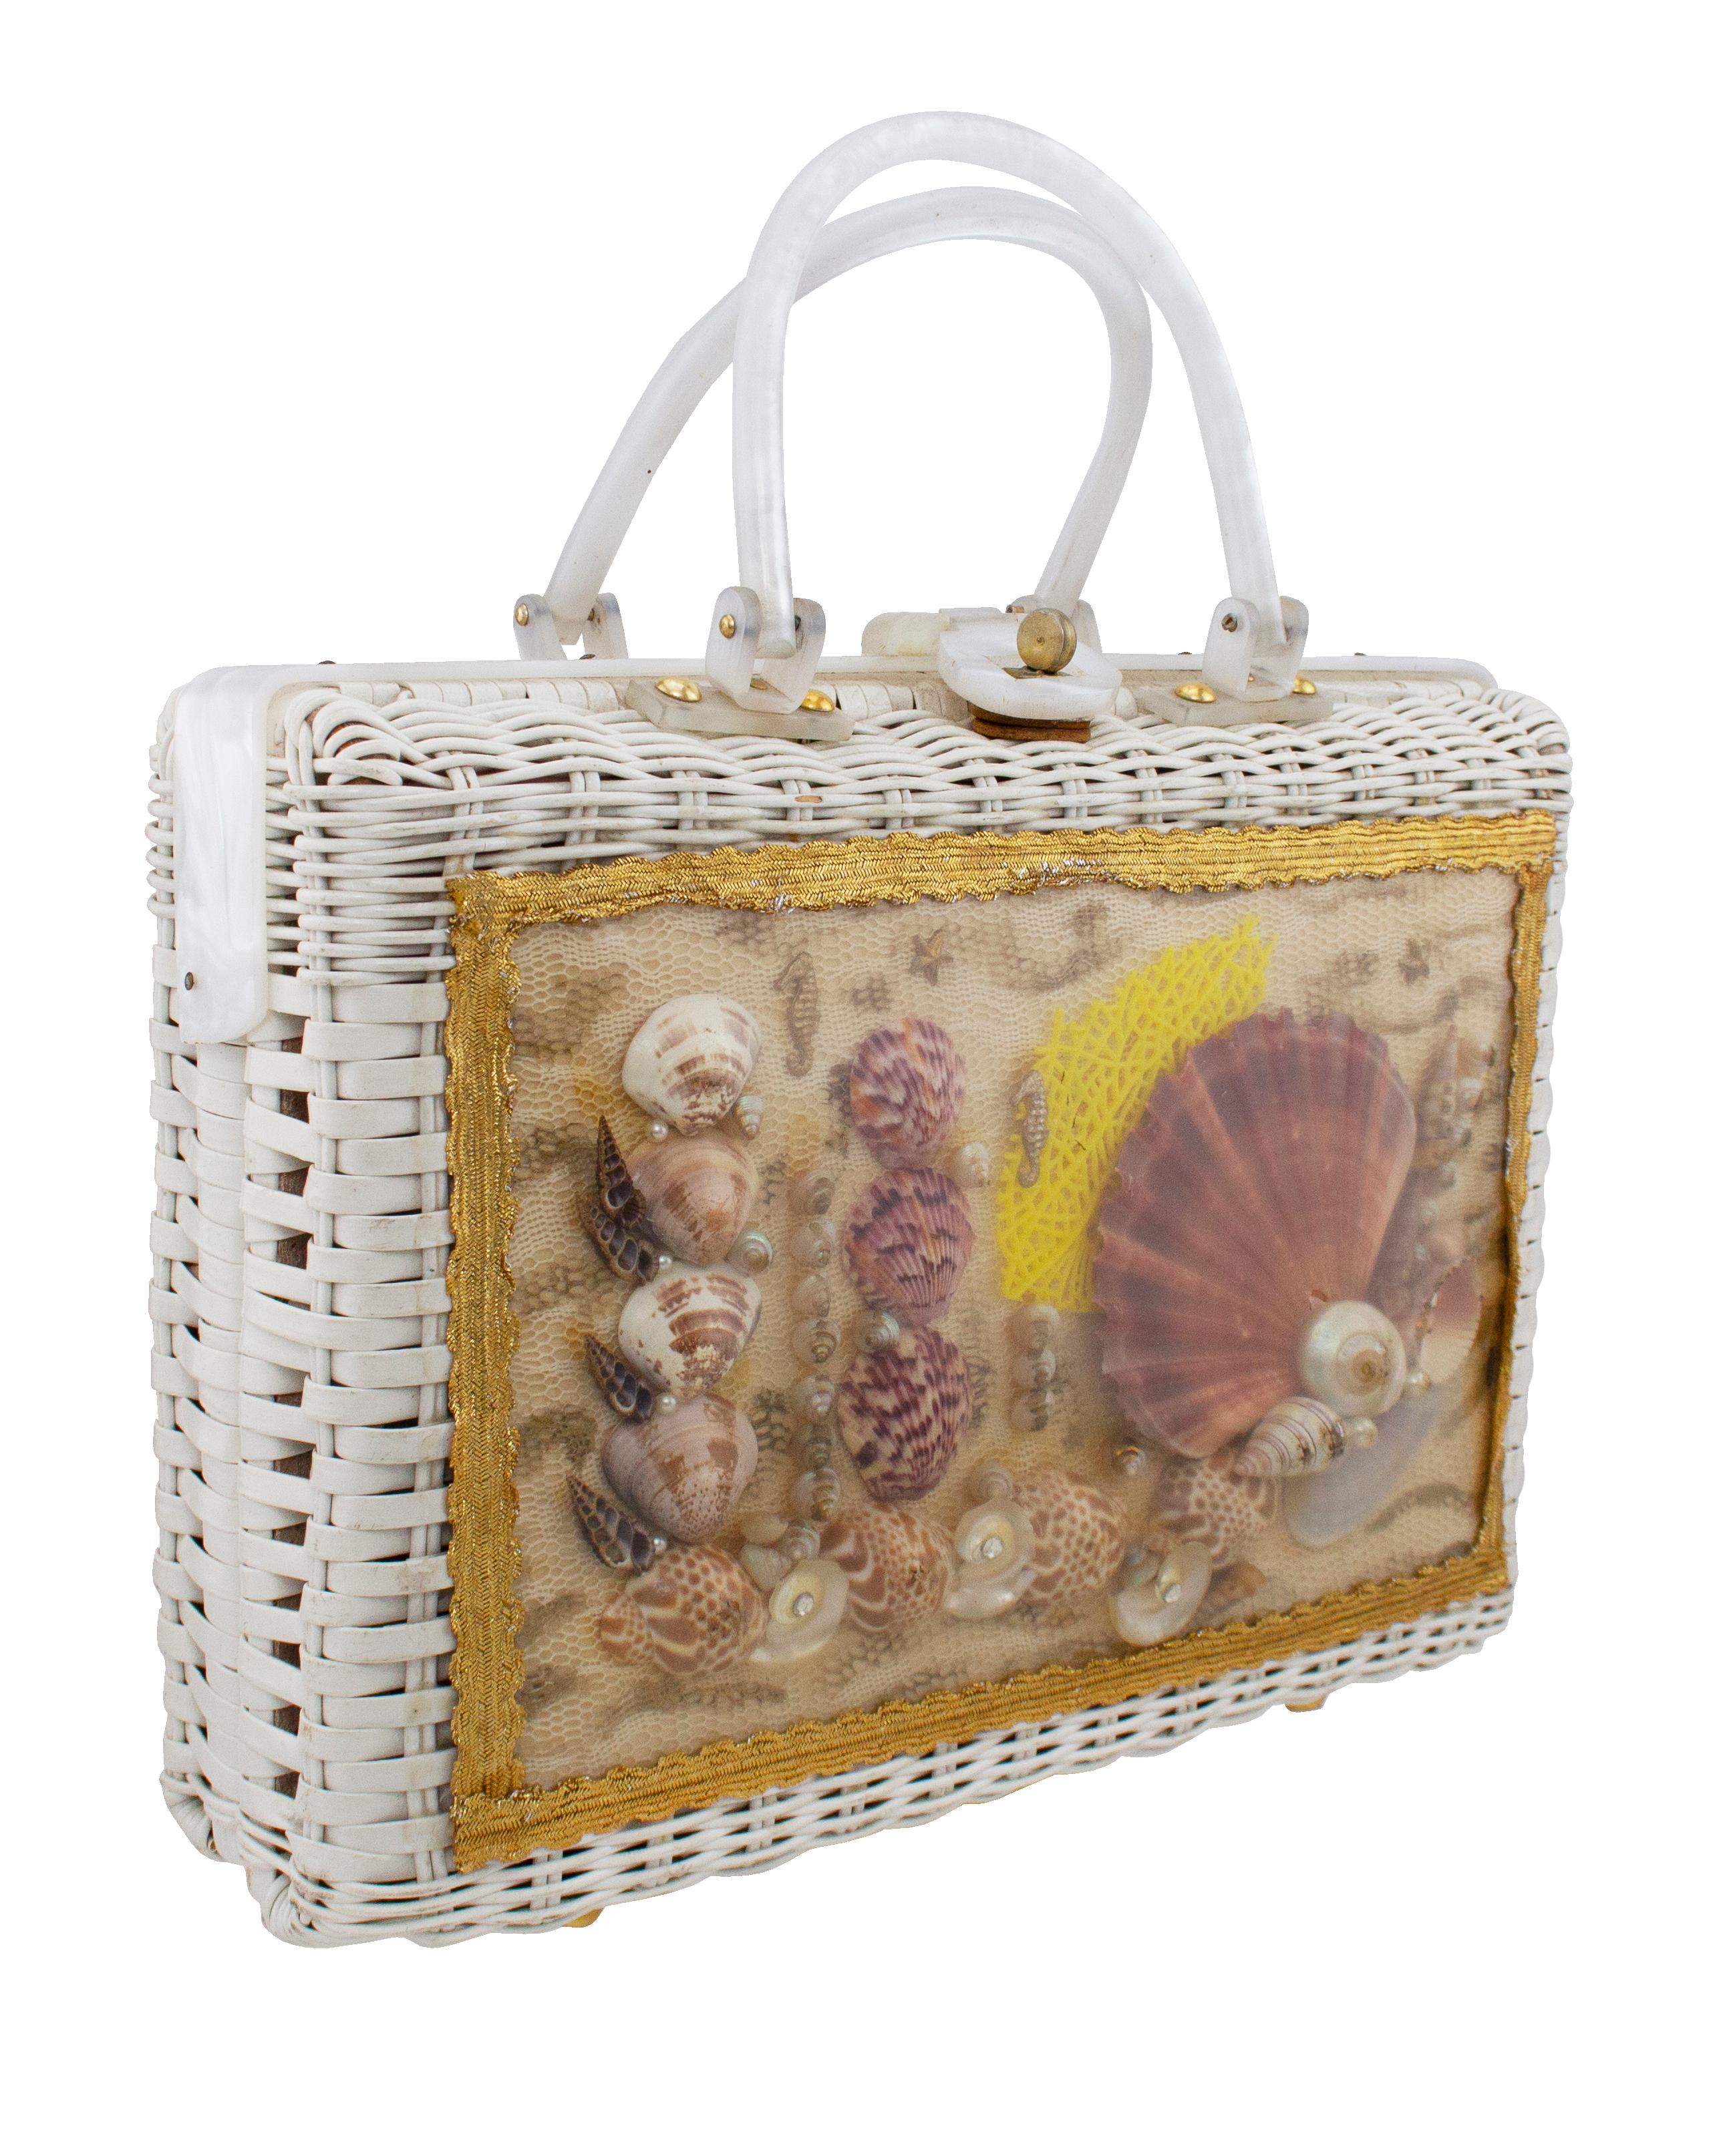 This 1960s top handle bag is so much fun! Frame style bag with white wicker body and a pearlized white frame and top handles with brass screws. The front features a collage of real 3D seashells on a piece of cream and tan macrame, that gives the